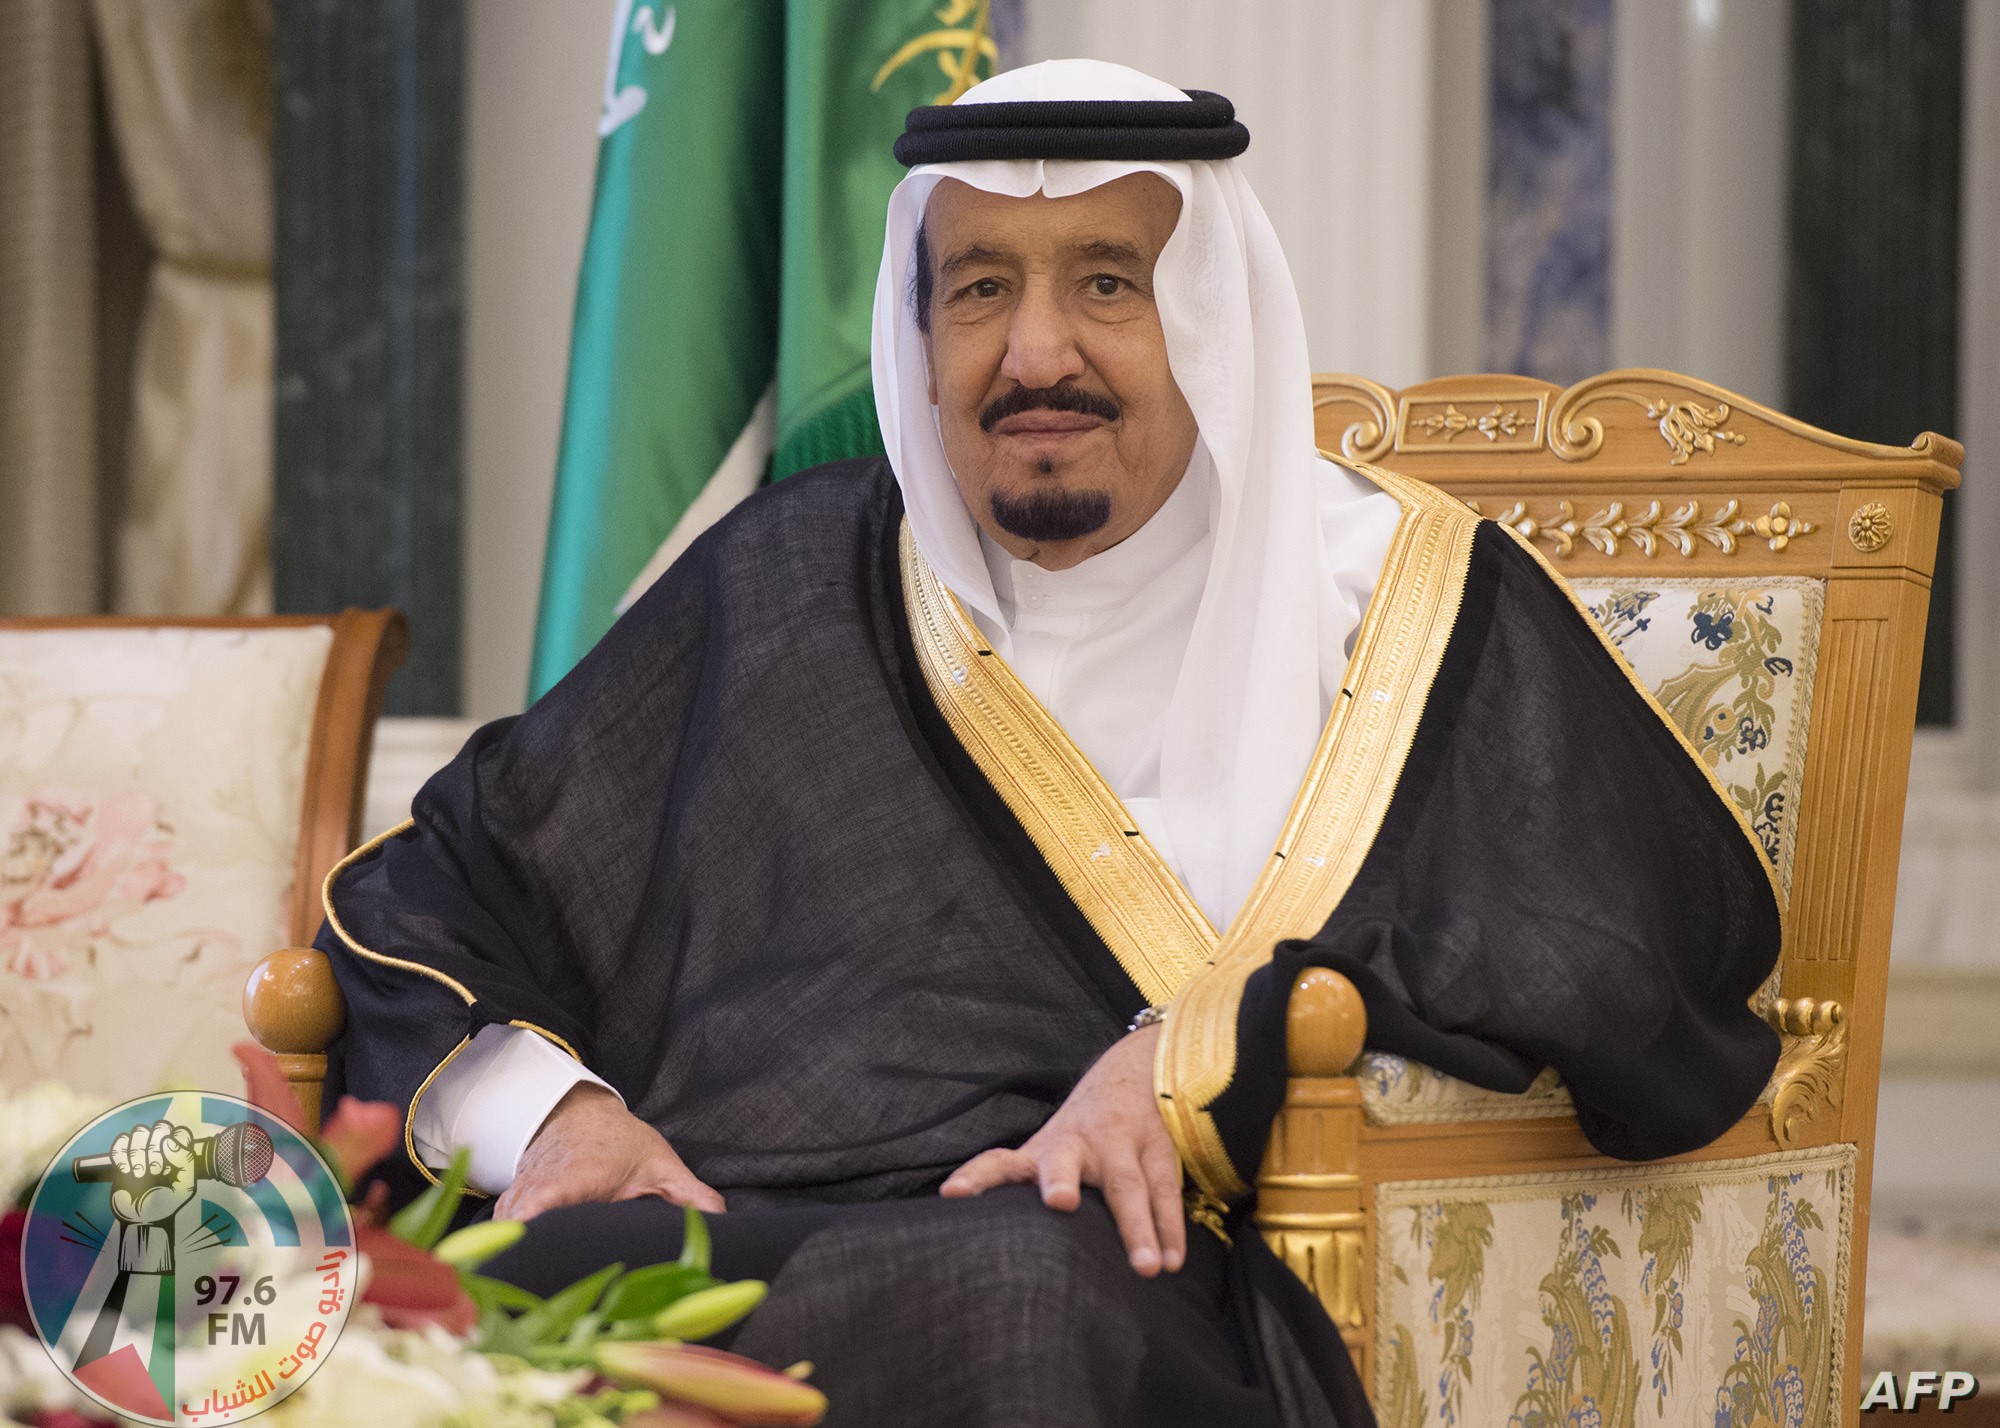 A handout picture provided by the Saudi Royal Palace on April 24, 2017 shows Saudi Arabia's King Salman bin Abdulaziz al-Saud attending a swearing in ceremony for new cabinet ministers and ambassadors in the capital Riyadh.
Prince Khaled bin Salman, son of current King Salman, was named by Saudi Arabia on April 22, 2017 as ambassador to its major ally the United States in Washington, with which ties are improving under President Donald Trump.
The change came among a series of orders issued by the king, who shuffled his cabinet, restored civil service benefits, and replaced the head of the army which for two years has been fighting rebels in neighbouring Yemen. / AFP PHOTO / Saudi Royal Palace / BANDAR AL-JALOUD / RESTRICTED TO EDITORIAL USE - MANDATORY CREDIT "AFP PHOTO / SAUDI ROYAL PALACE / BANDAR AL-JALOUD" - NO MARKETING - NO ADVERTISING CAMPAIGNS - DISTRIBUTED AS A SERVICE TO CLIENTS